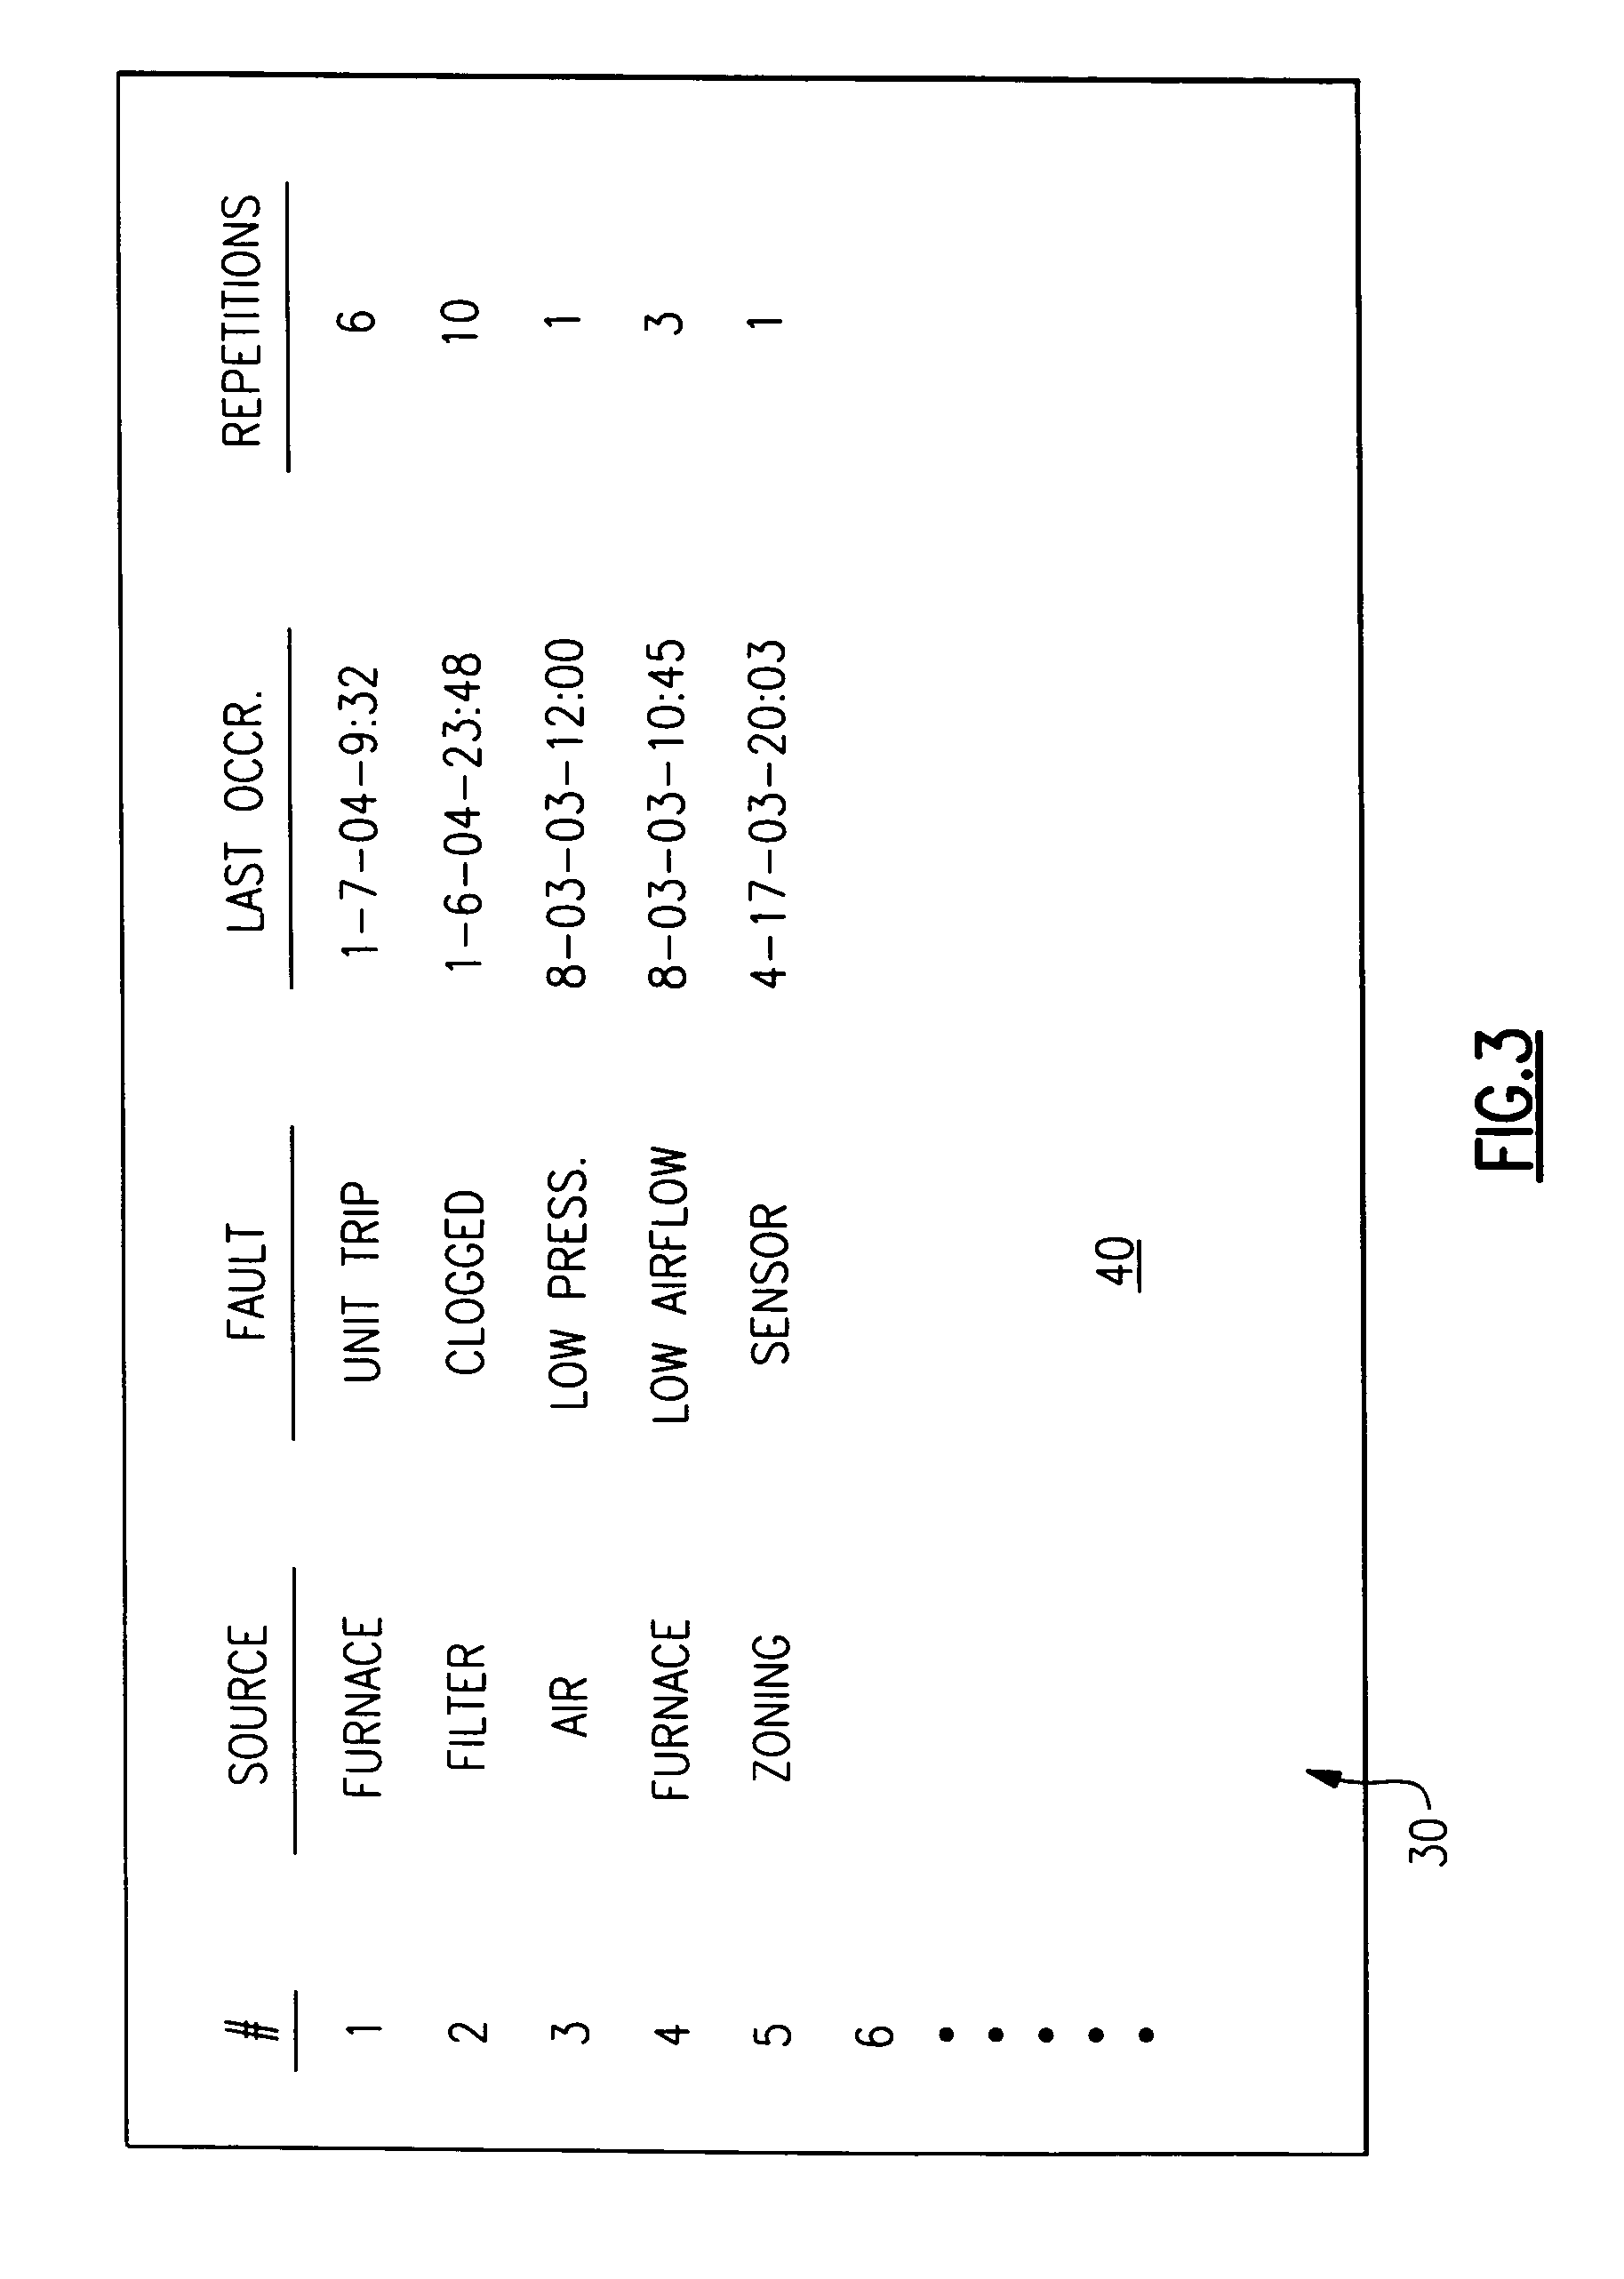 Ordered record of system-wide fault in an HVAC system